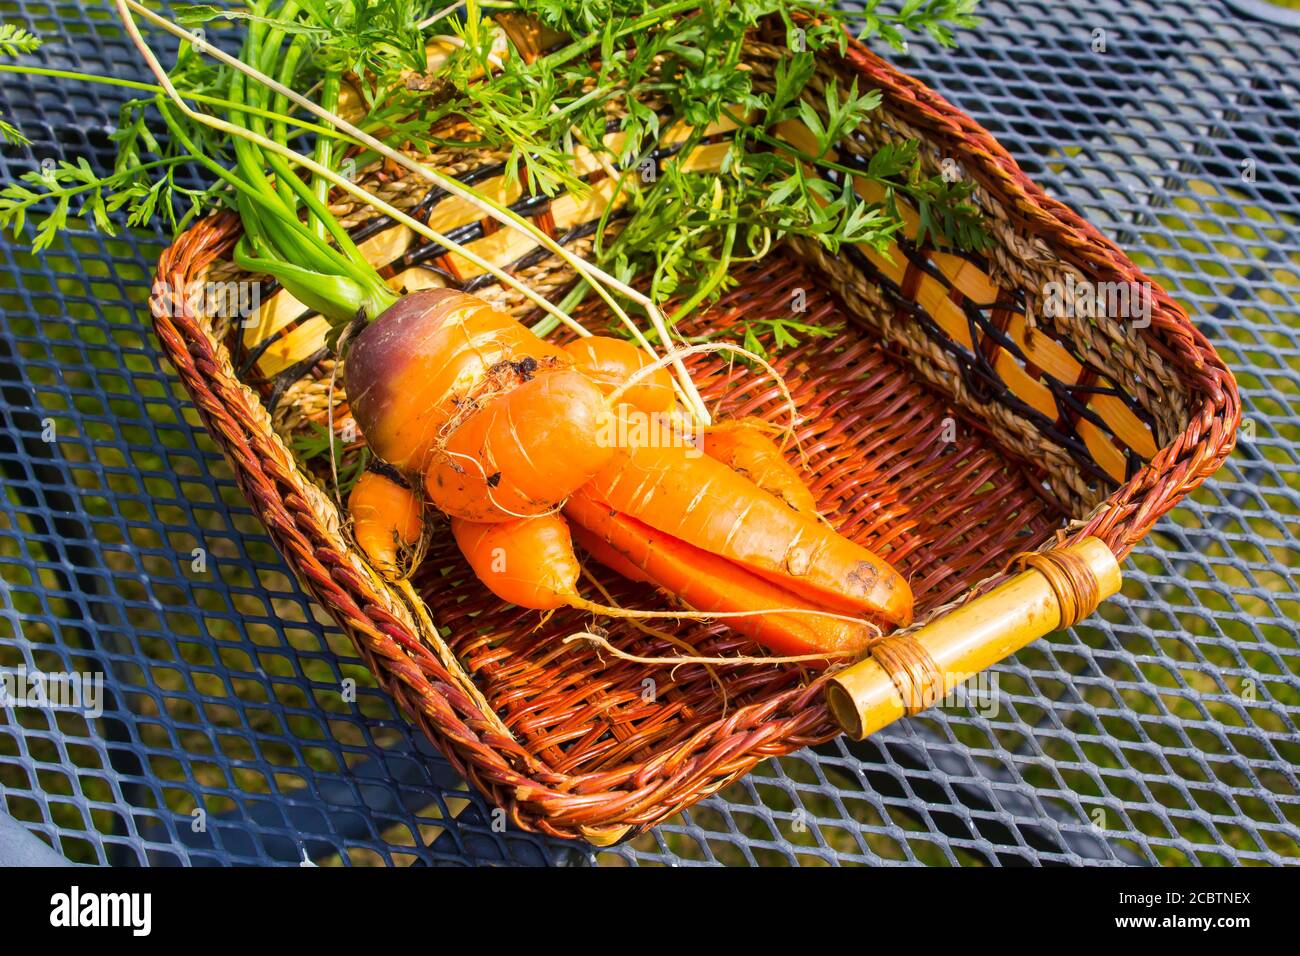 A badly twisted and deformed carrot that has been harvested from heavy soil in a local garden in Bangor Northern Ireland Stock Photo